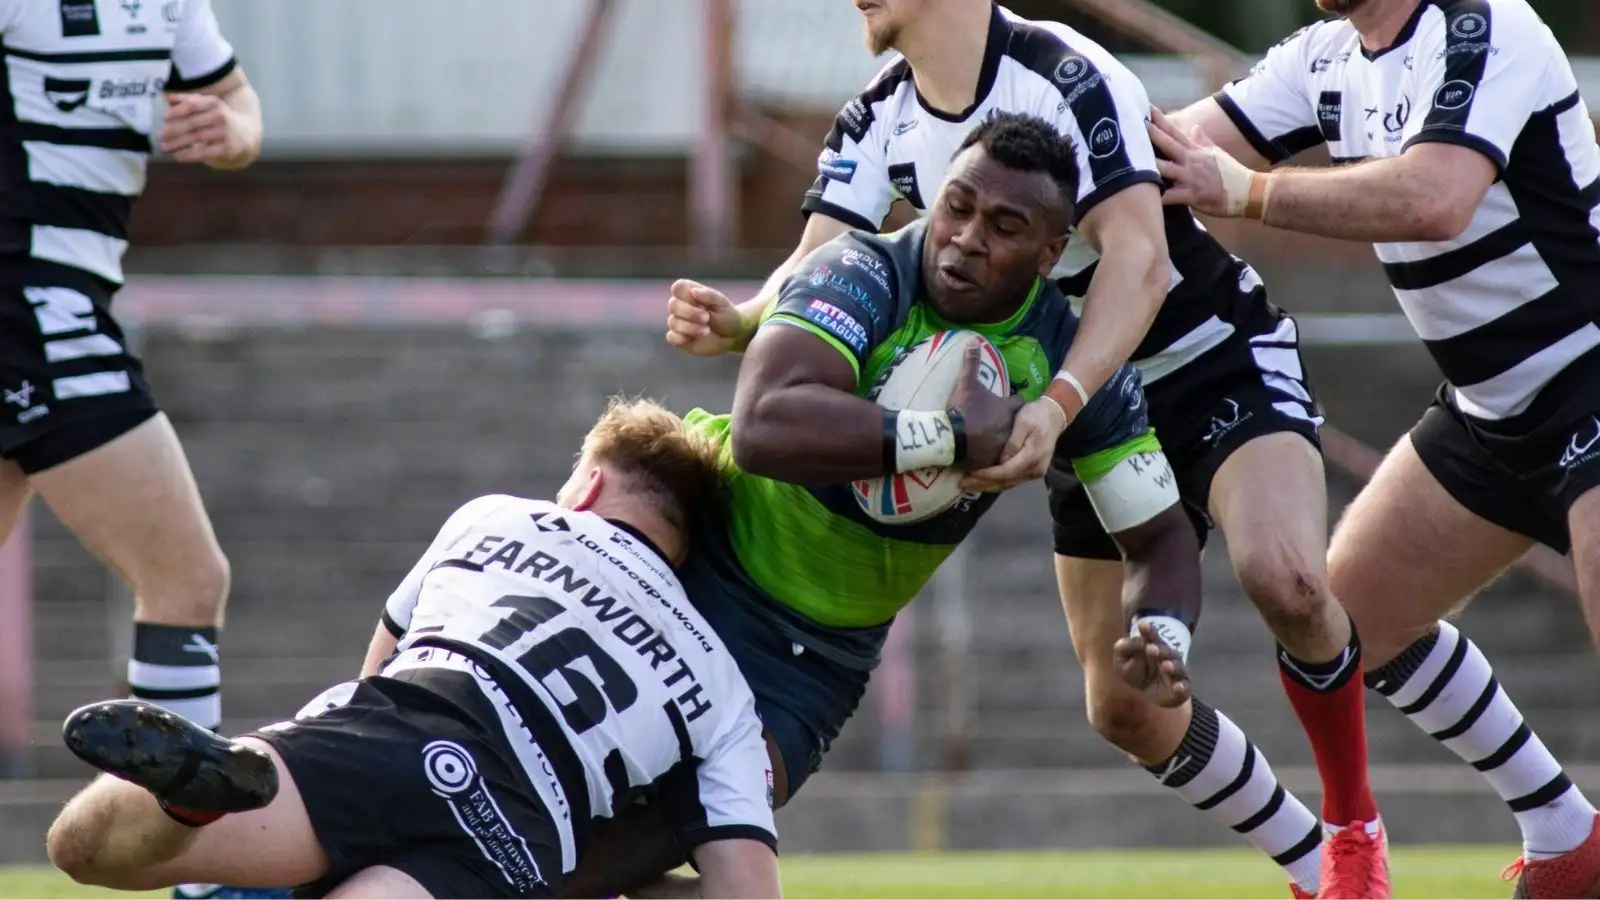 Oldham swoop for Widnes Vikings forward as Ireland international signs new deal with Roughyeds